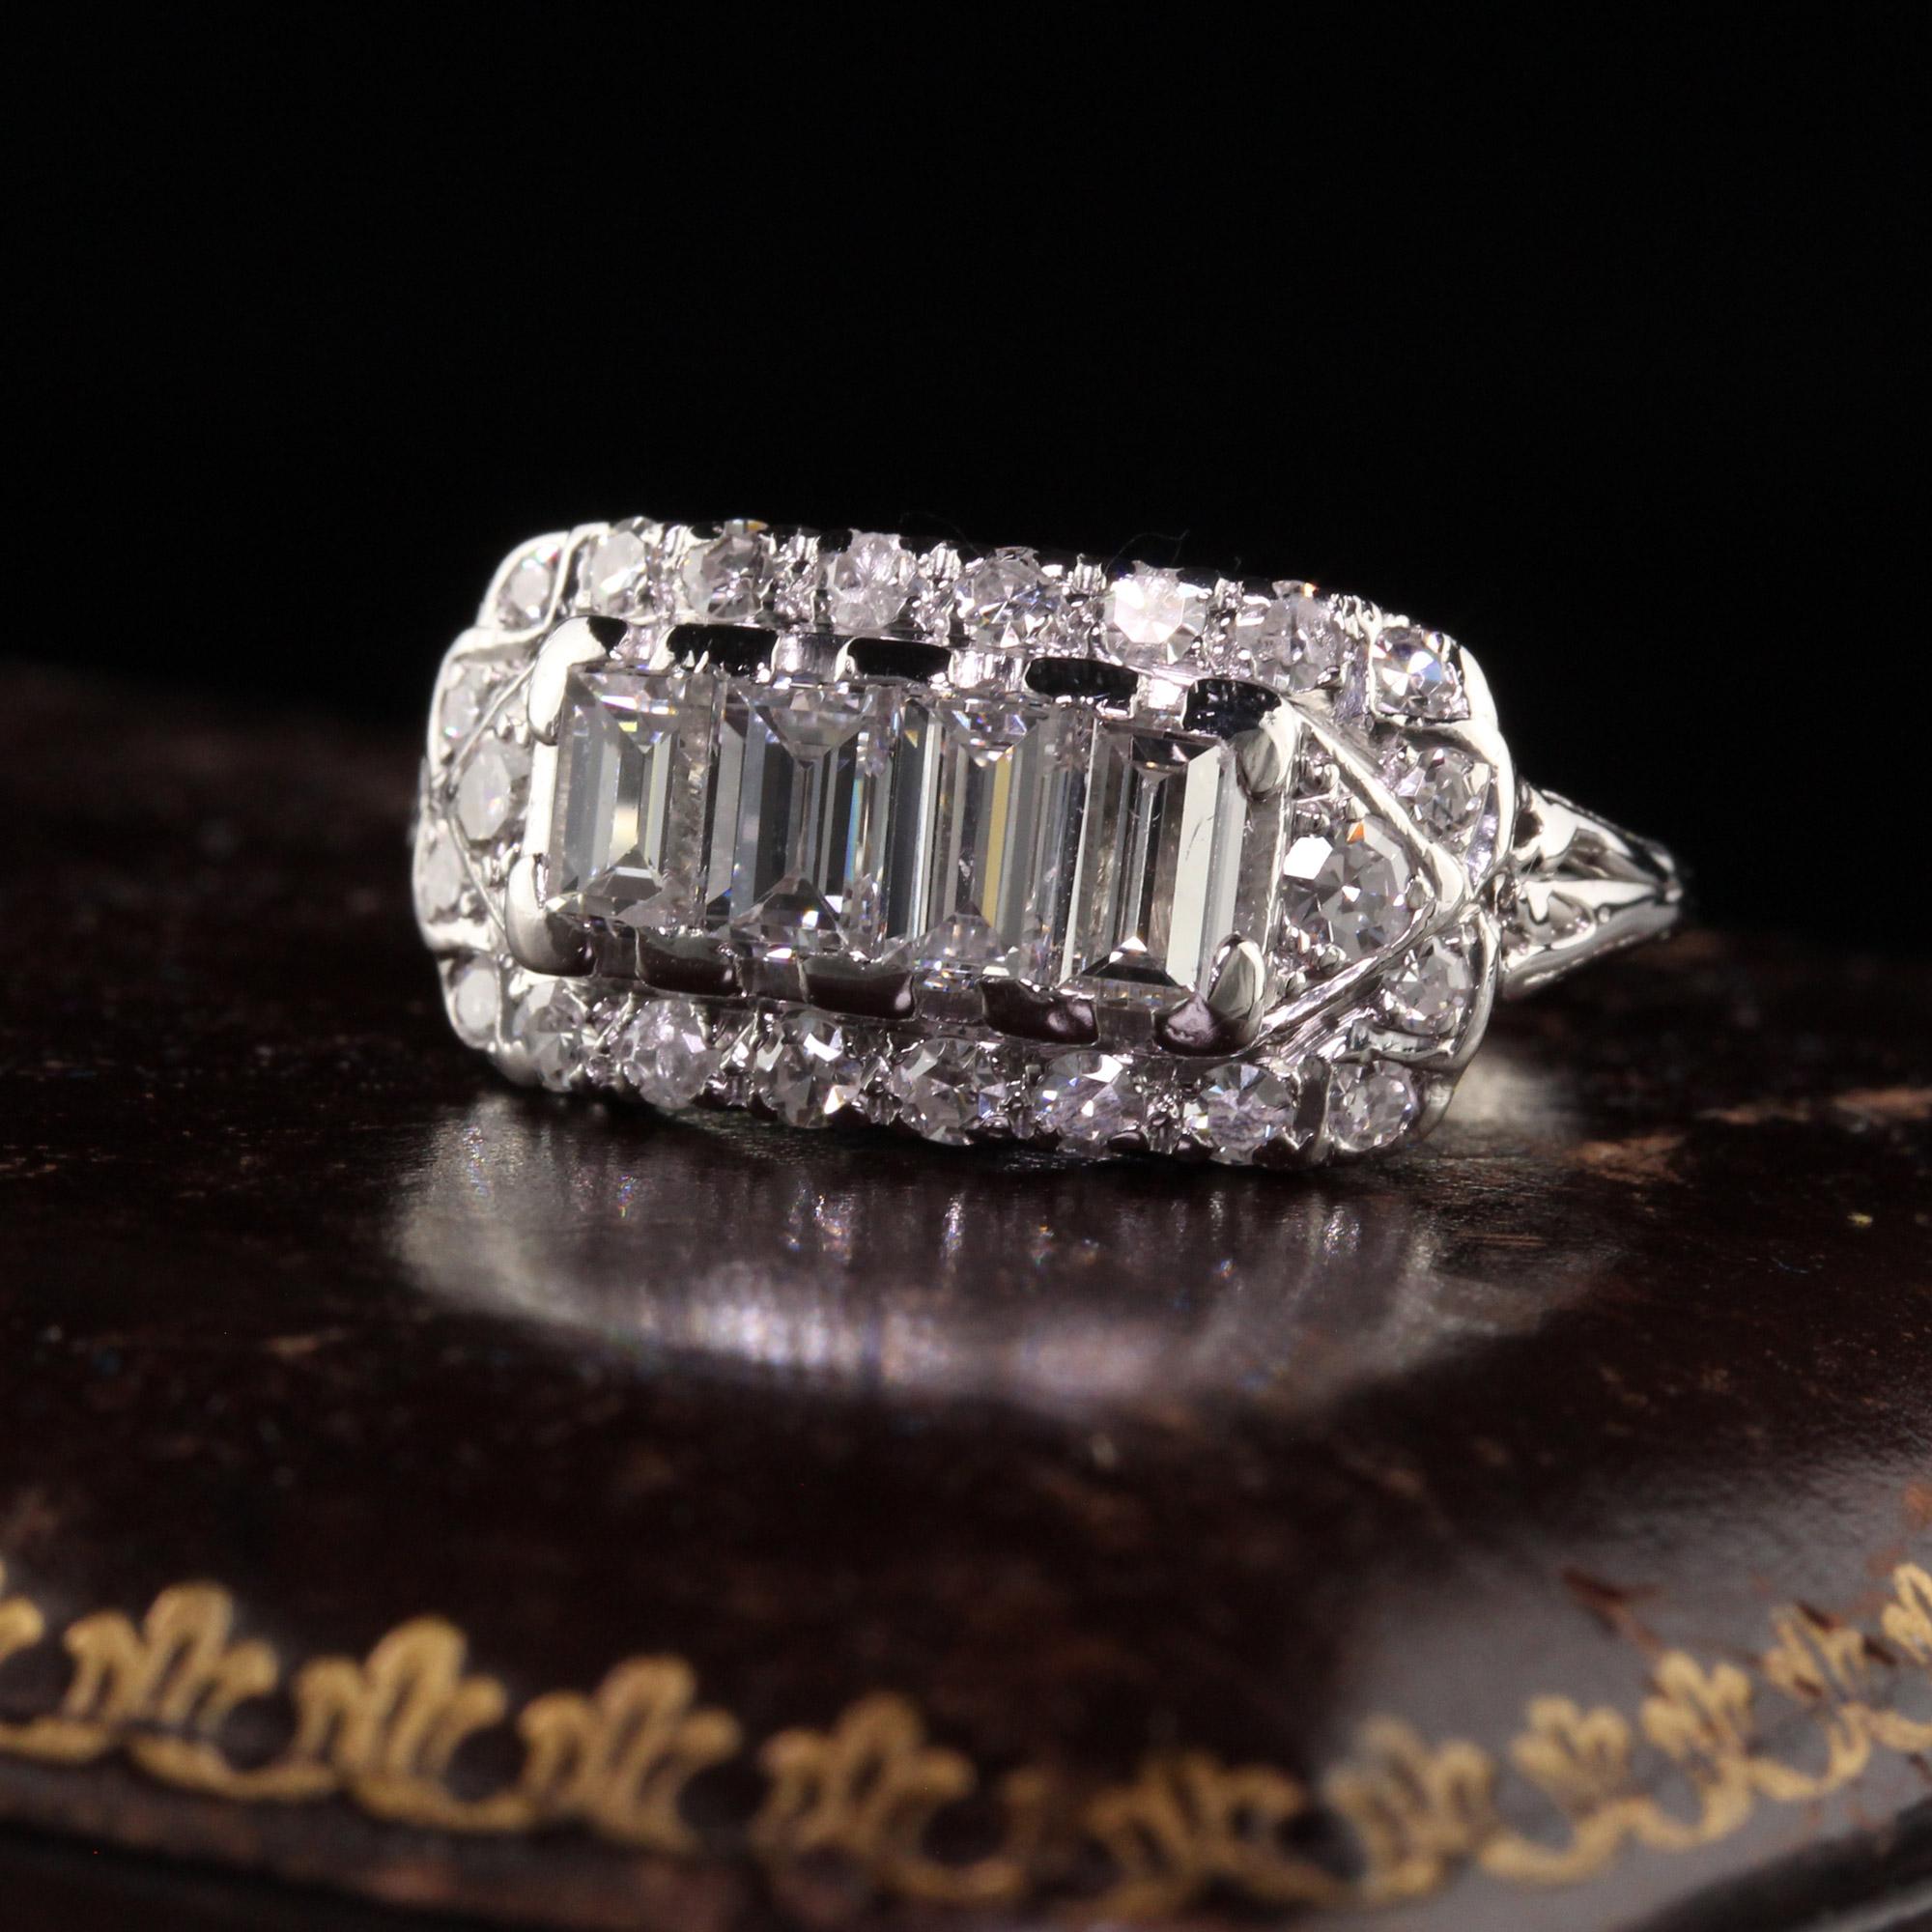 Beautiful Antique Art Deco 18K White Gold Old Cut Diamond Baguette Ring. This beautiful ring is crafted in 18k white gold. The center of the ring holds large diamond baguettes and is surrounded by single cut diamonds. The ring is in good condition